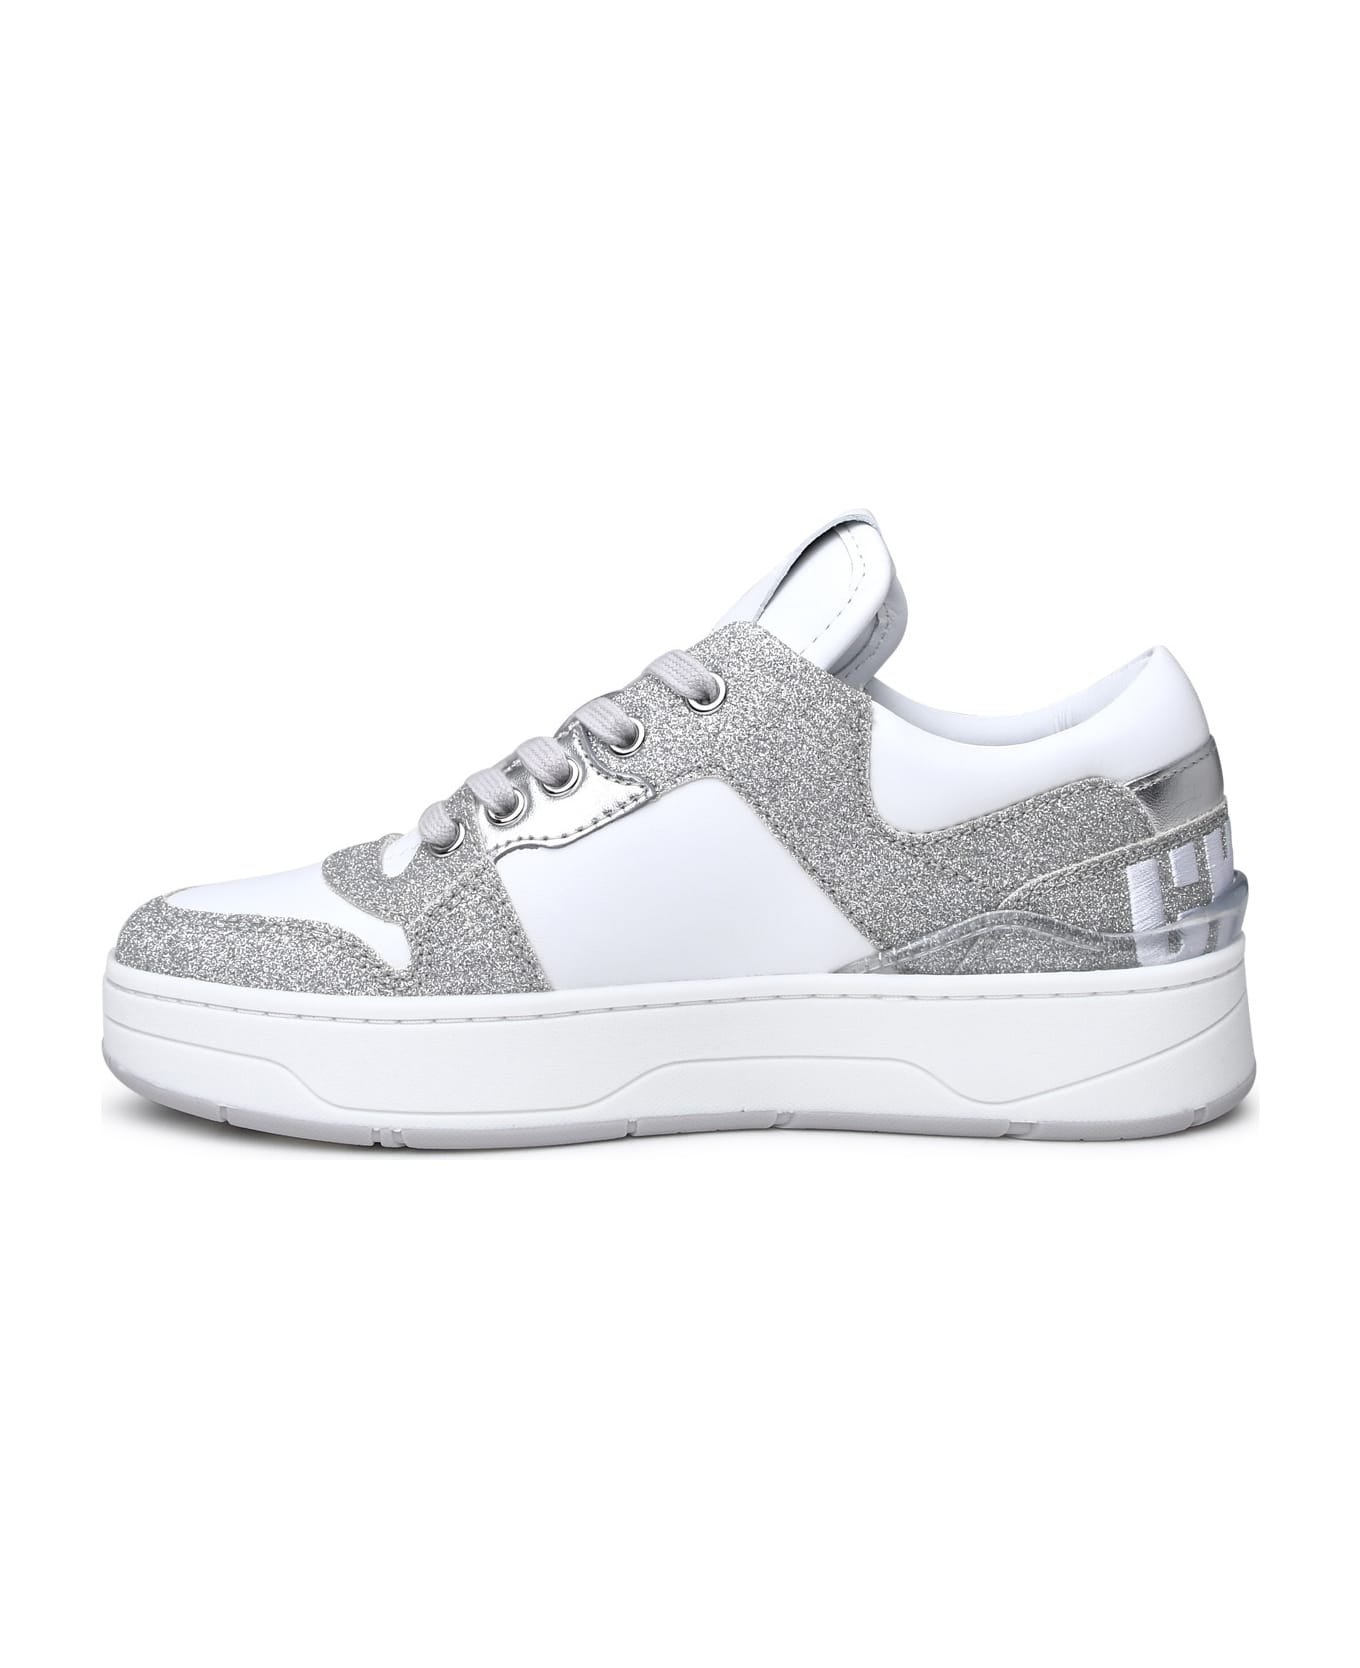 Jimmy Choo Cashmere White chie Sneakers - White